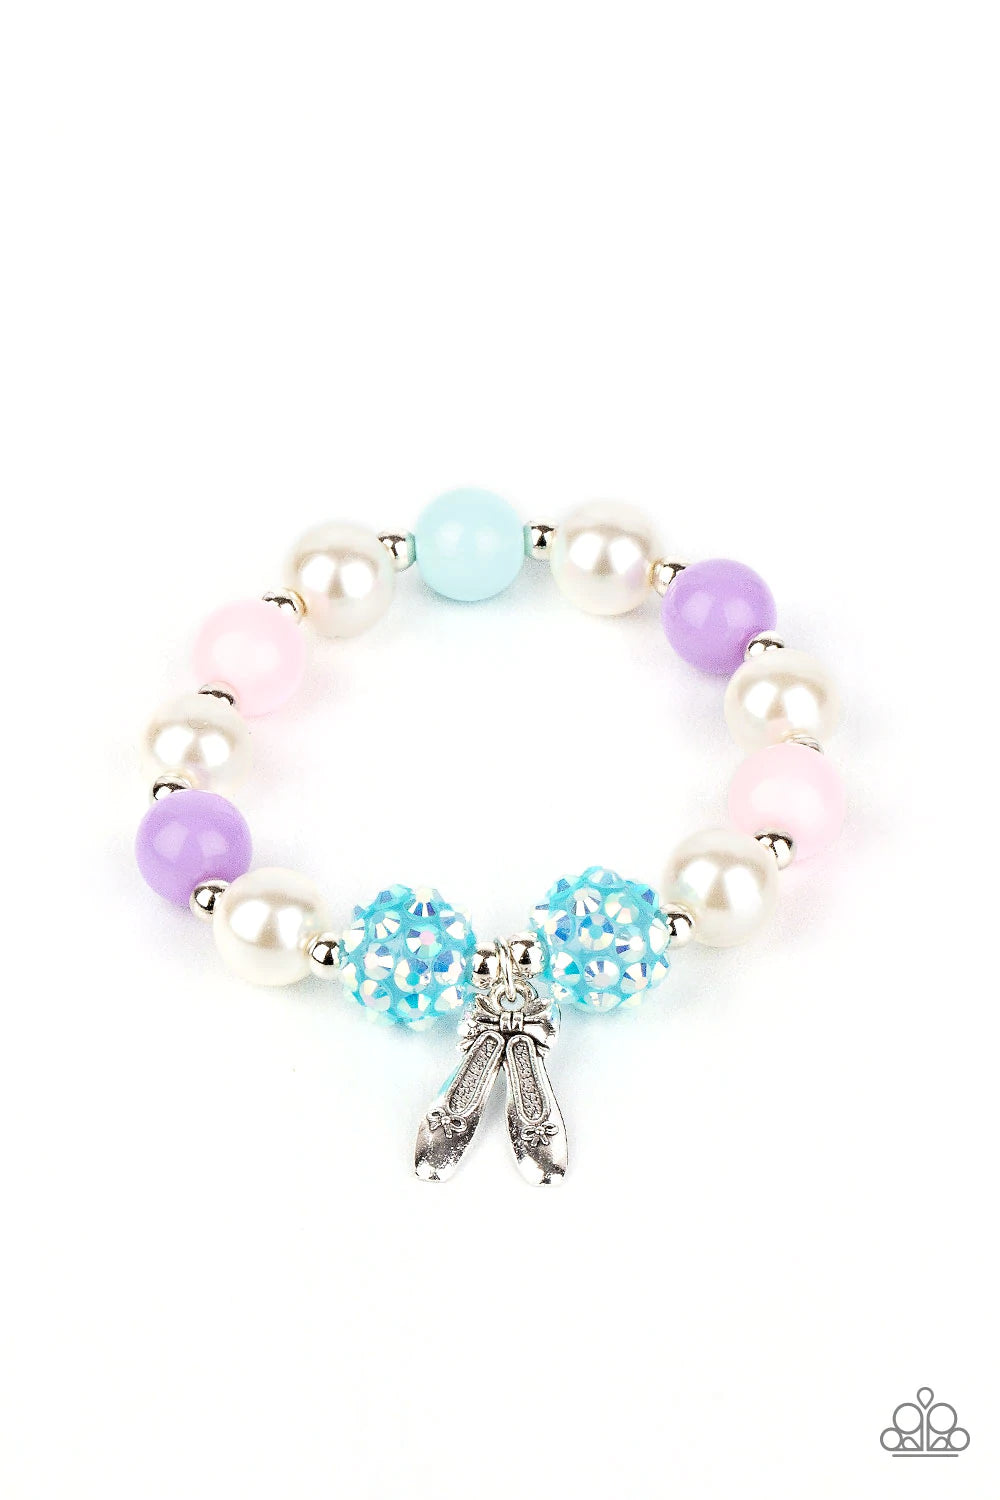 Paparazzi Accessories Starlet Shimmer Bracelets #22 Infused with dainty silver ballet slipper charms, the stretchy bracelets feature pearly, polished, and iridescent rhinestone studded beads that vary in shades of pink, purple, blue, green, and white. Jew